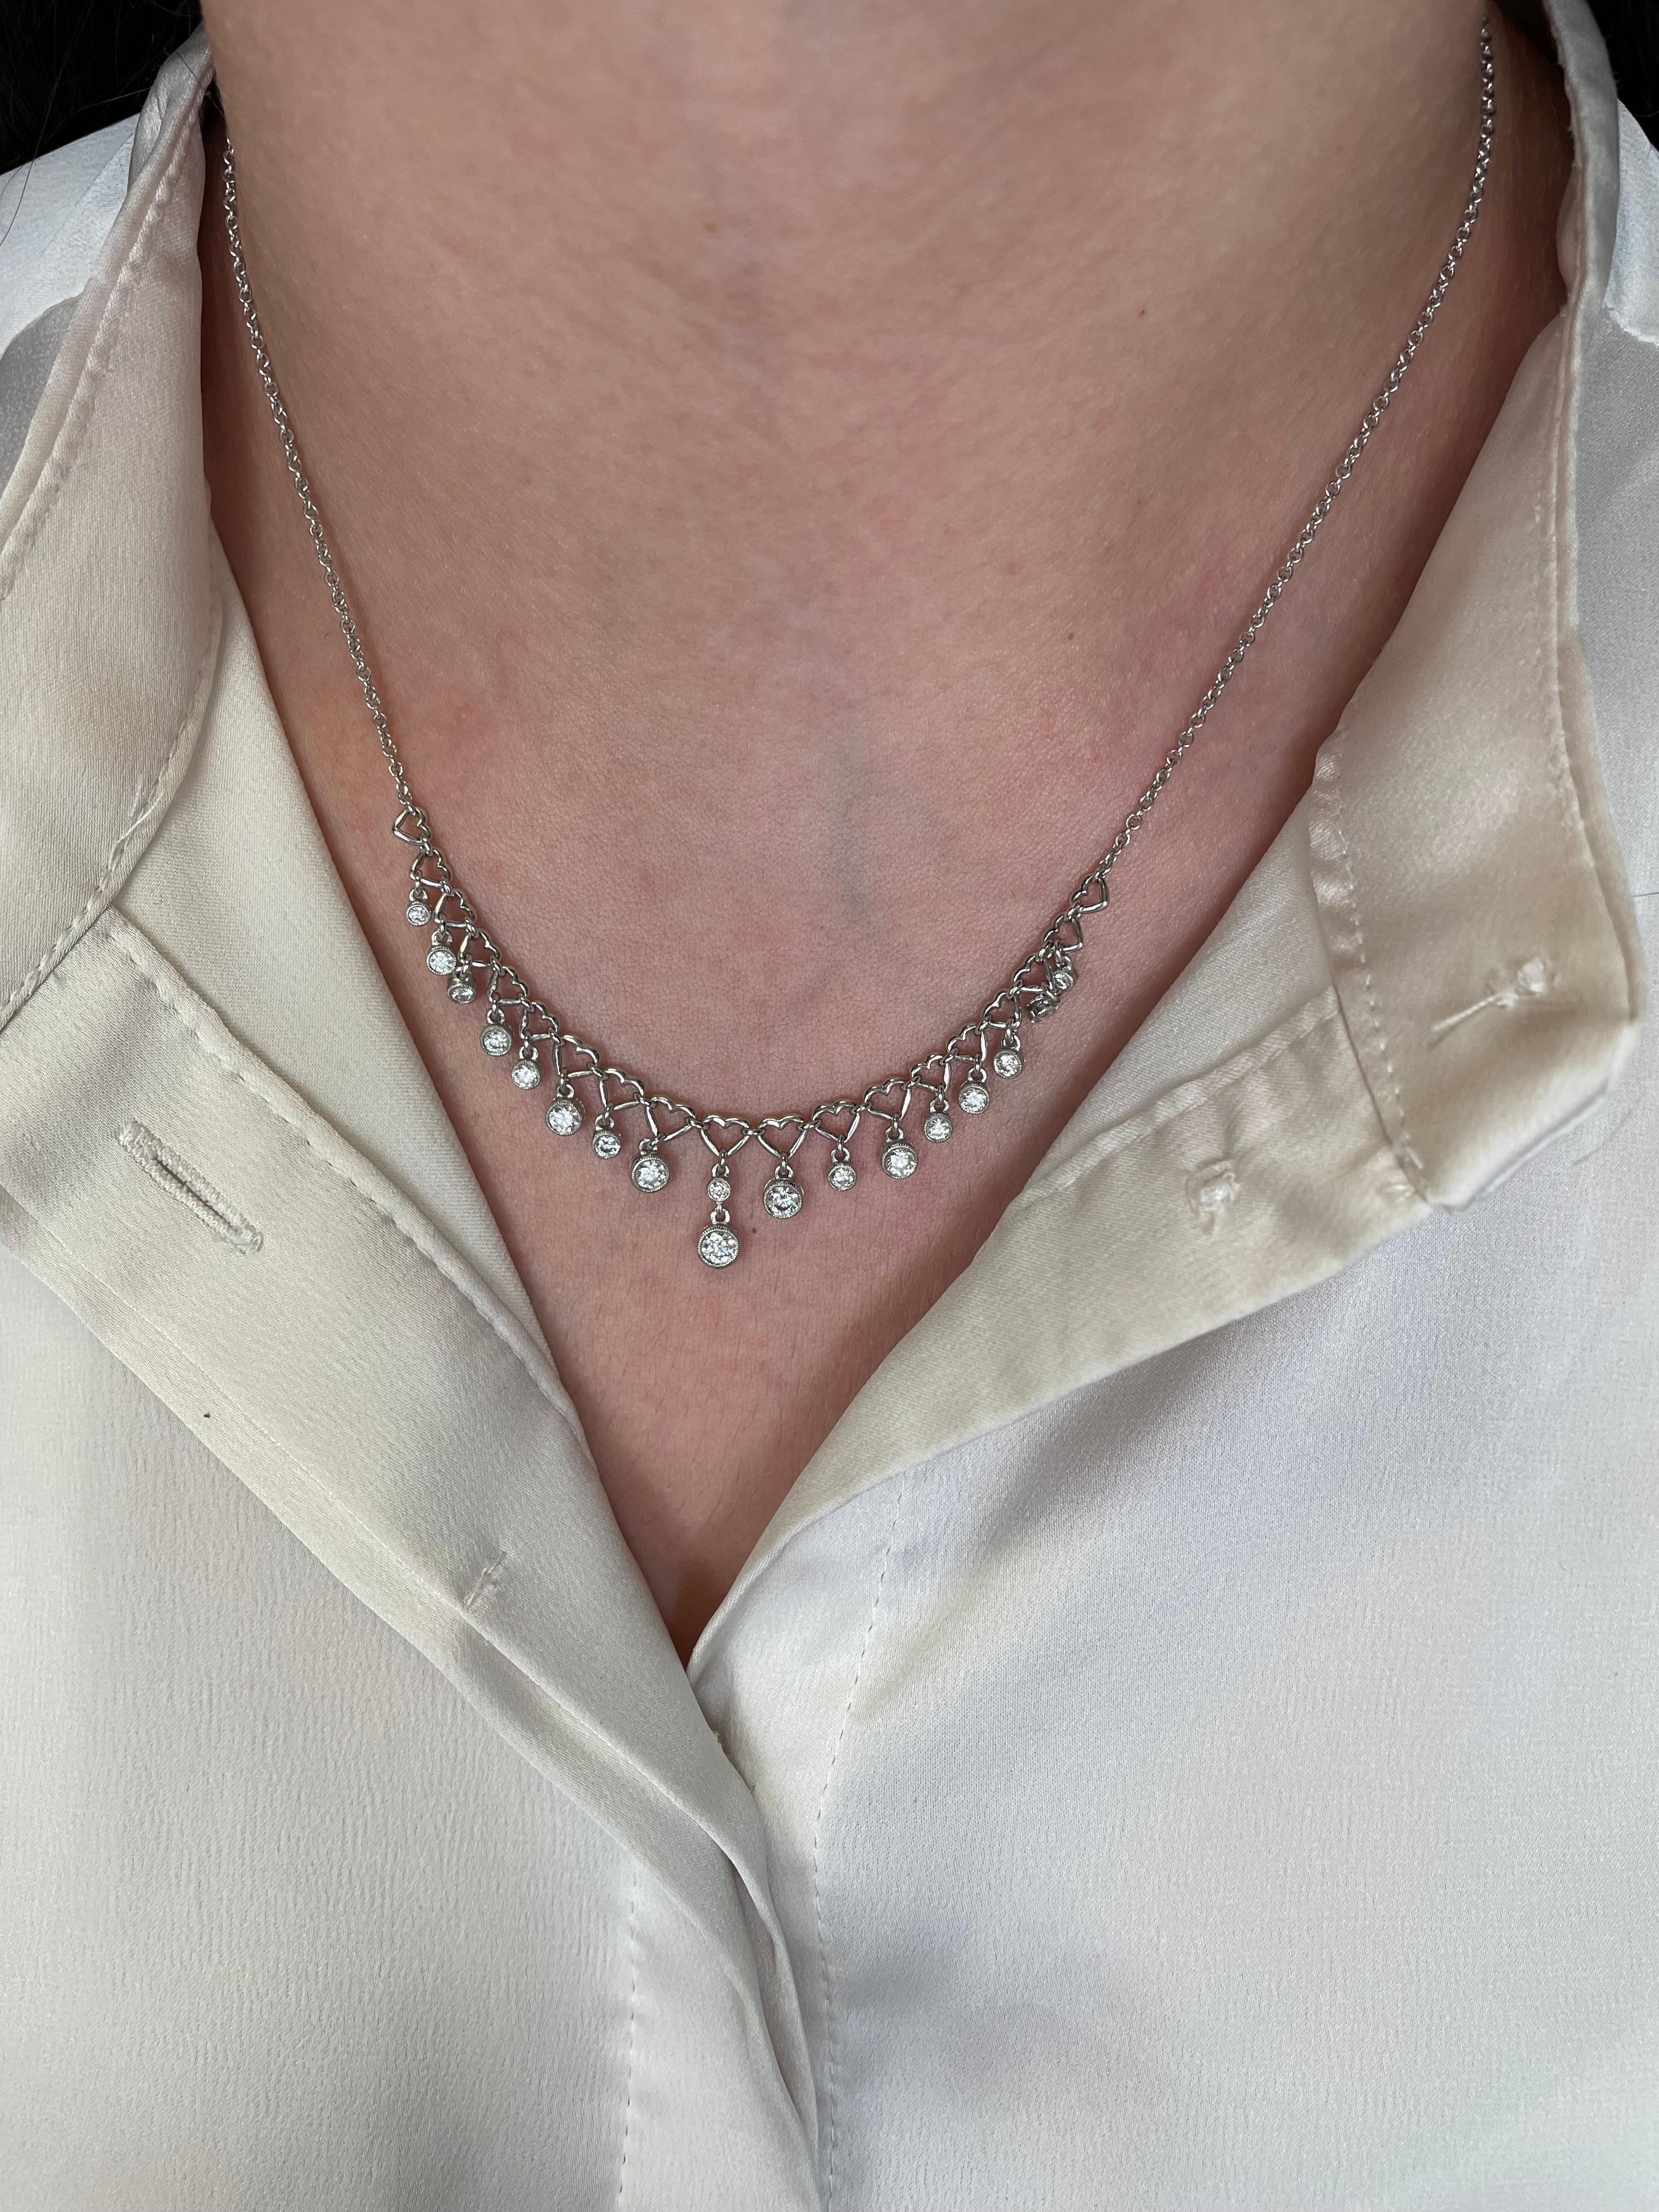 Lovely dangling diamond necklace with heart design, bezel set.
18 round brilliant diamonds, 1.13 carats. Approximately G/H color and SI clarity. 18-karat white gold.
Accommodated with an up to date appraisal by a GIA G.G. upon request. Please